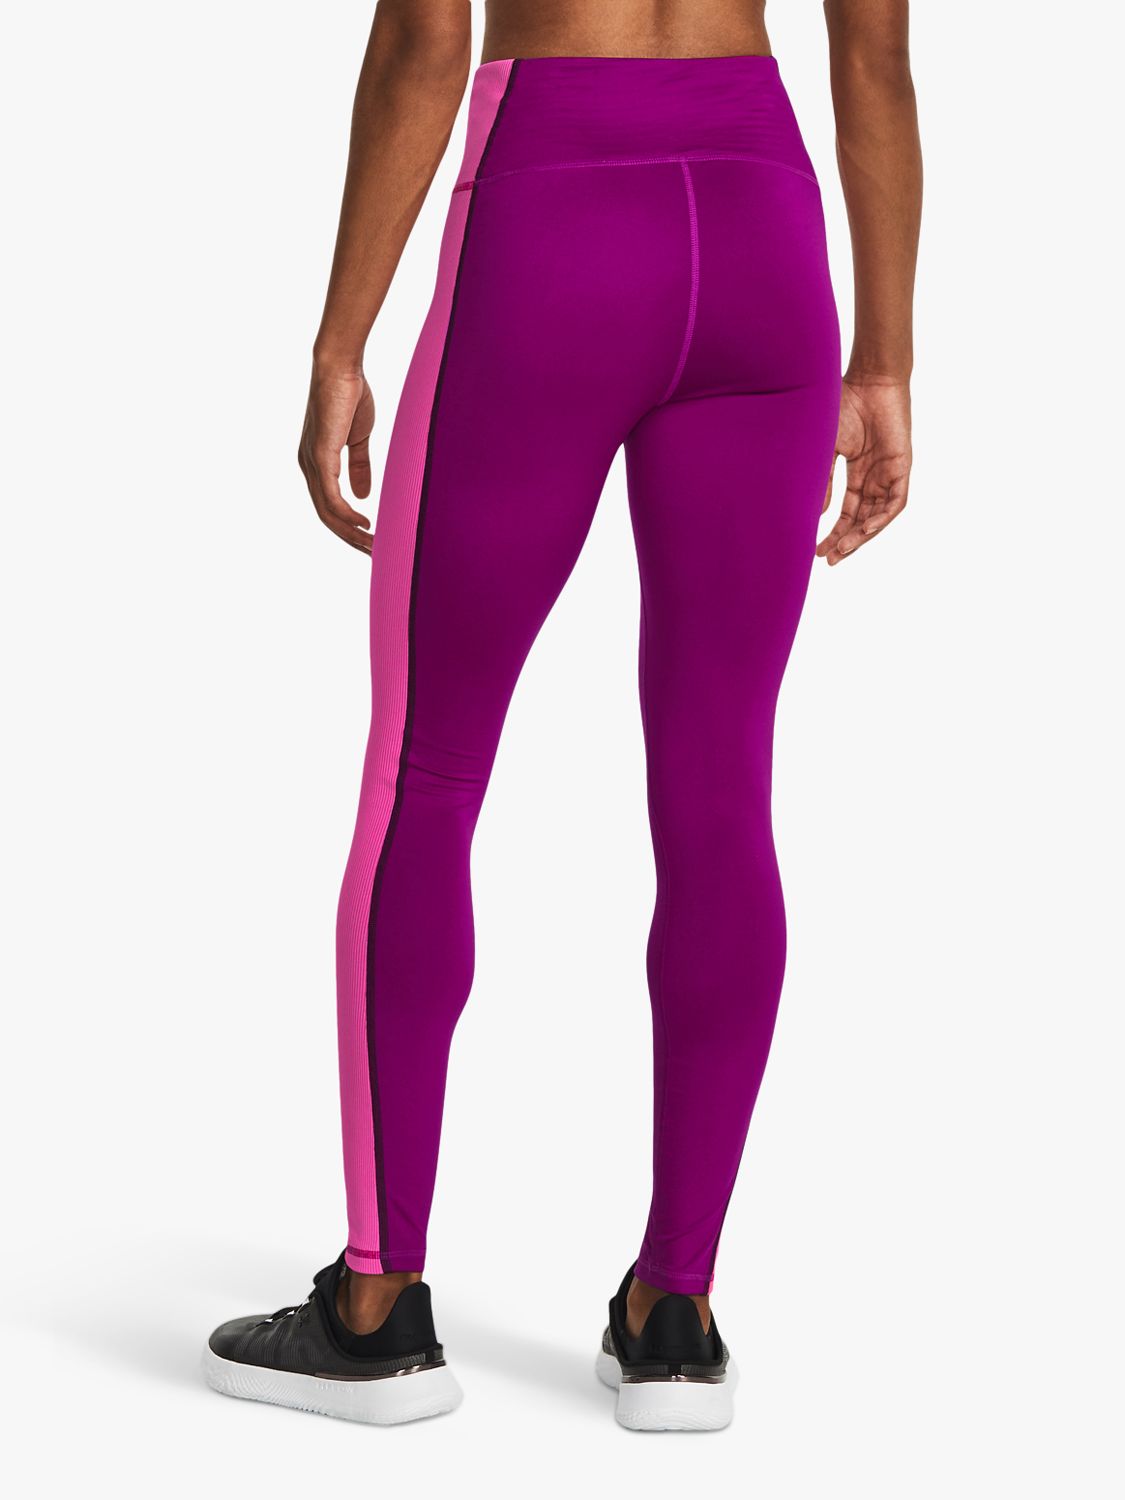 Under Armour Train Cold Weather Gym Leggings, Magenta/Pink/Black, XS